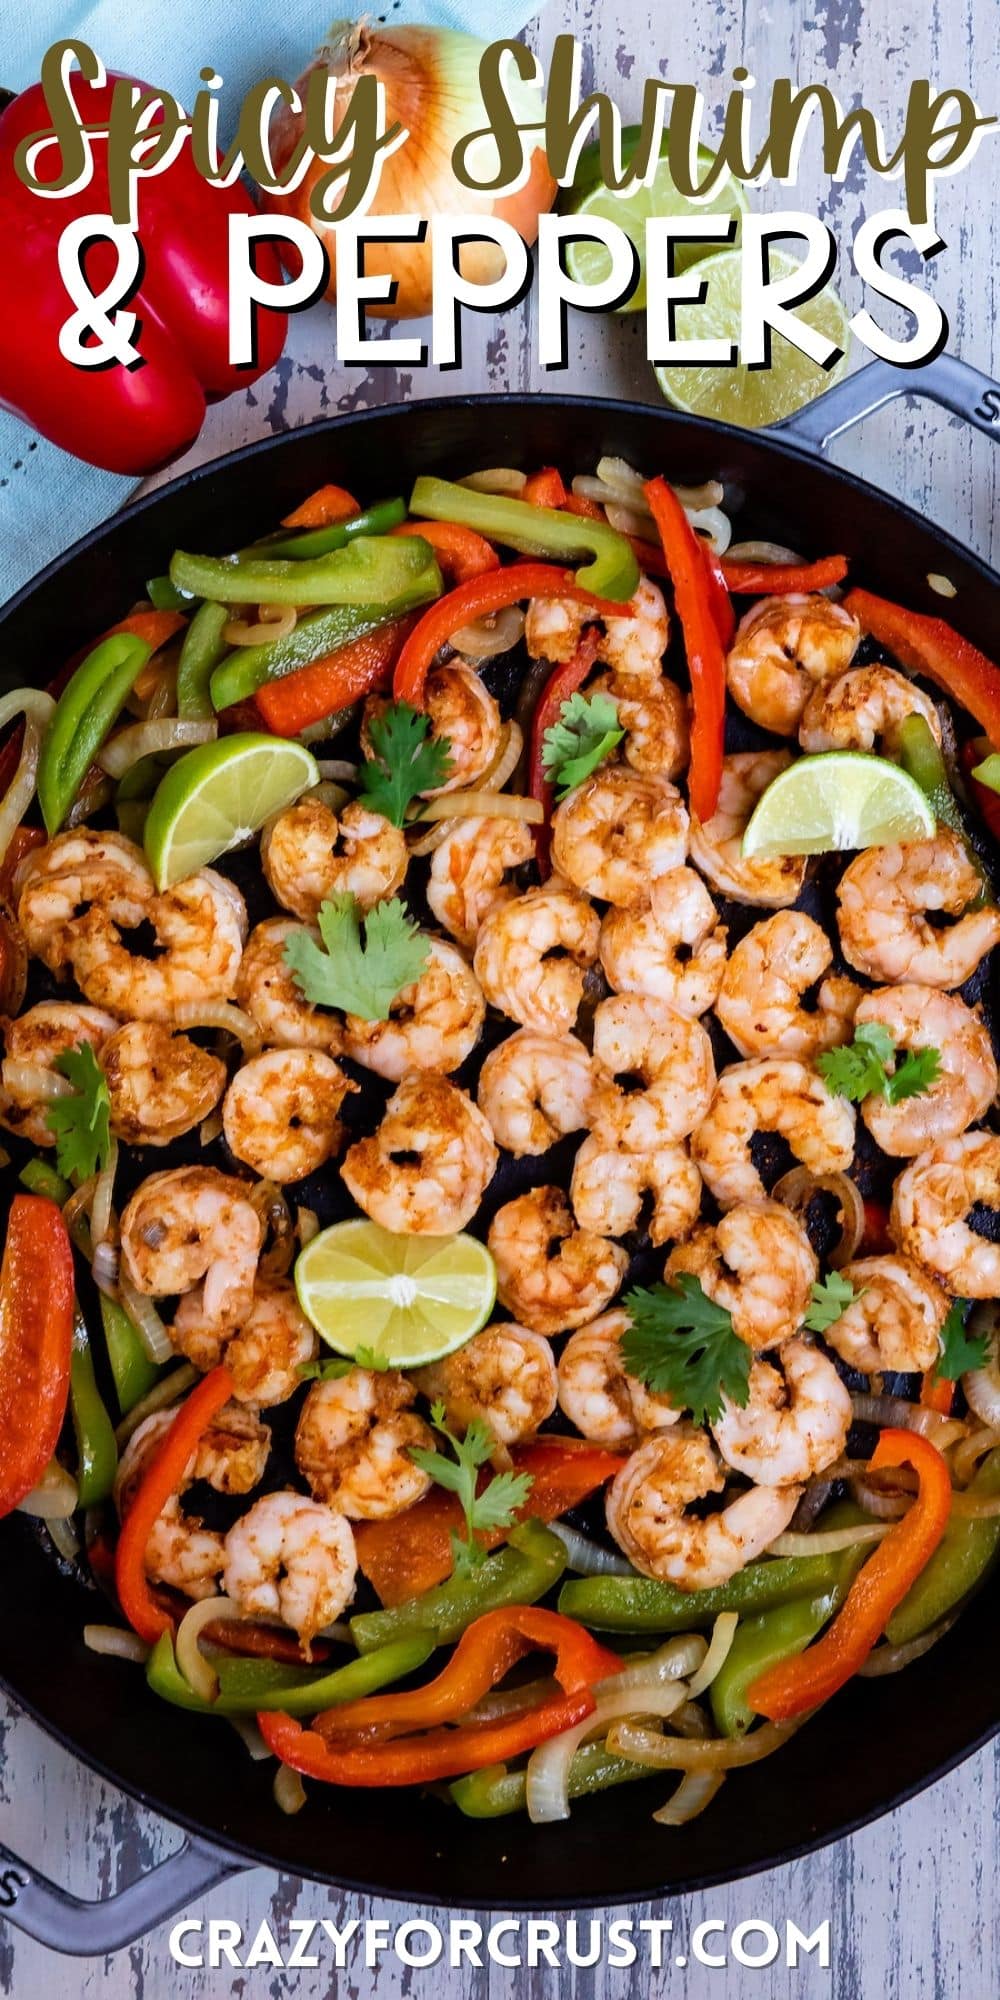 shrimp and limes and peppers mixed together in a black bowl and with words on the image